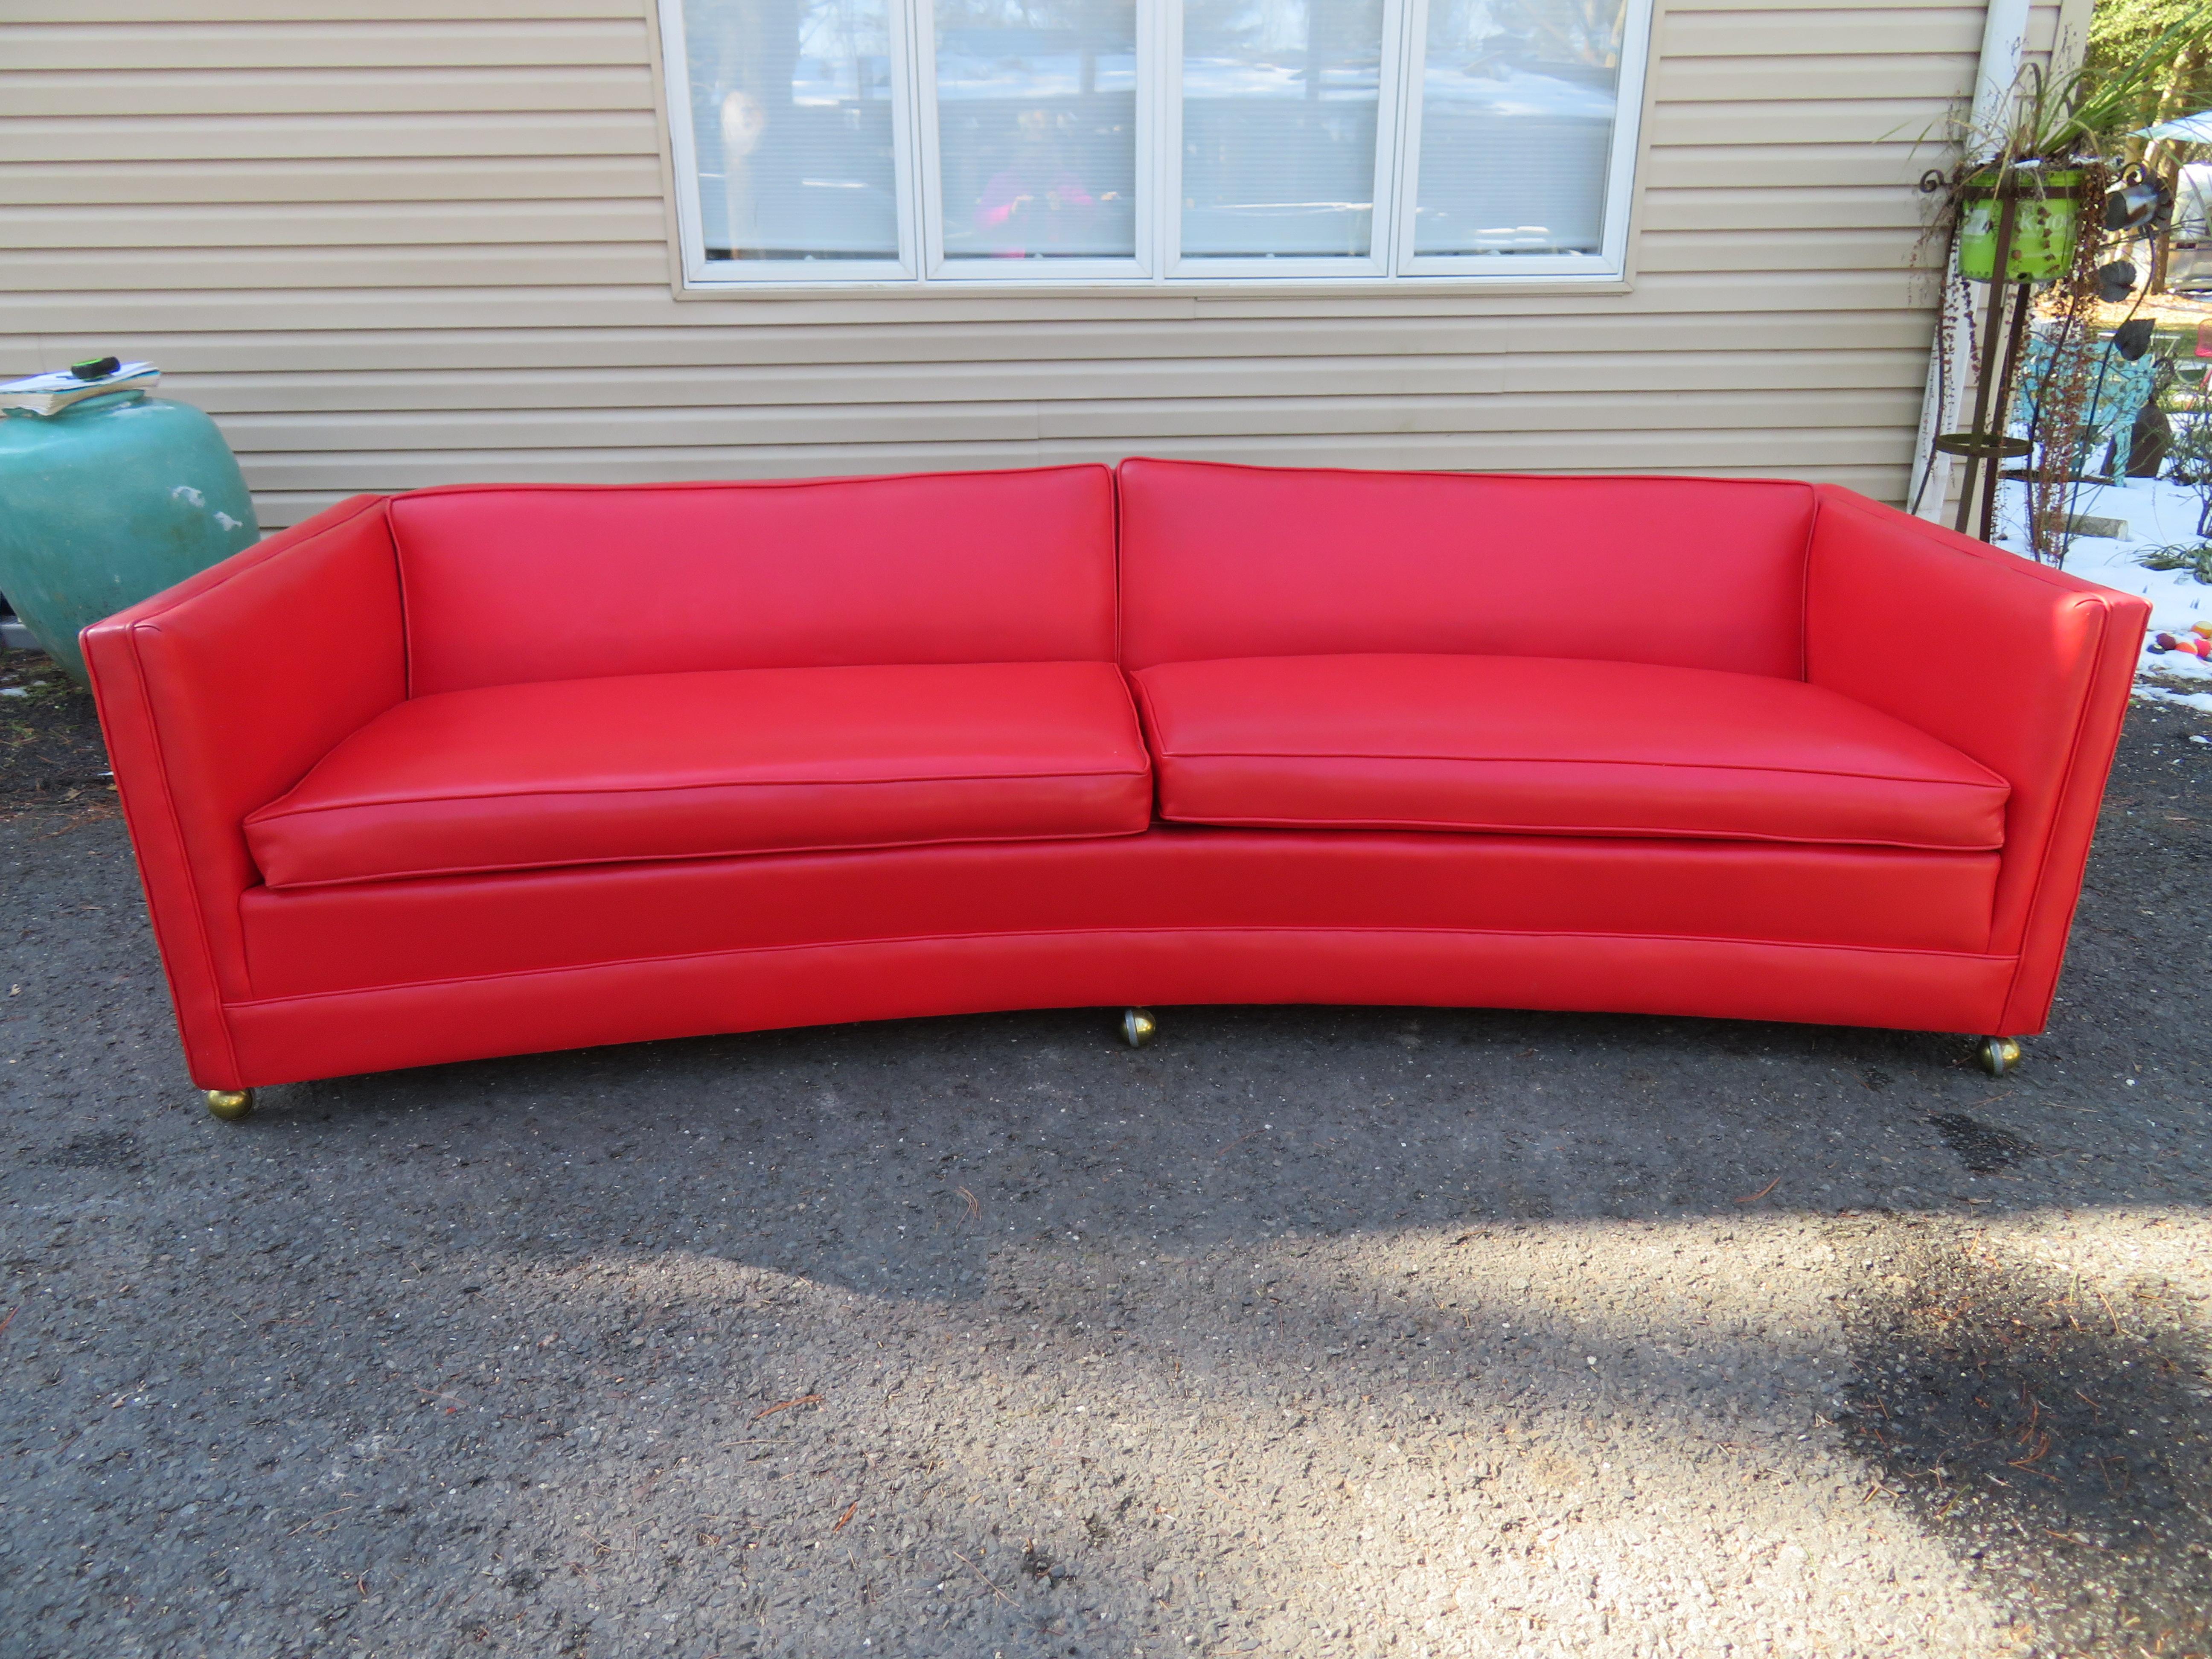 Handsome Harvey Probber attributed curved even arm sofa. This sofa retains its original red faux leather in nice vintage condition. It shows light wear but it is very presentable as is. This sofa is not only stylish but is very comfortable. It